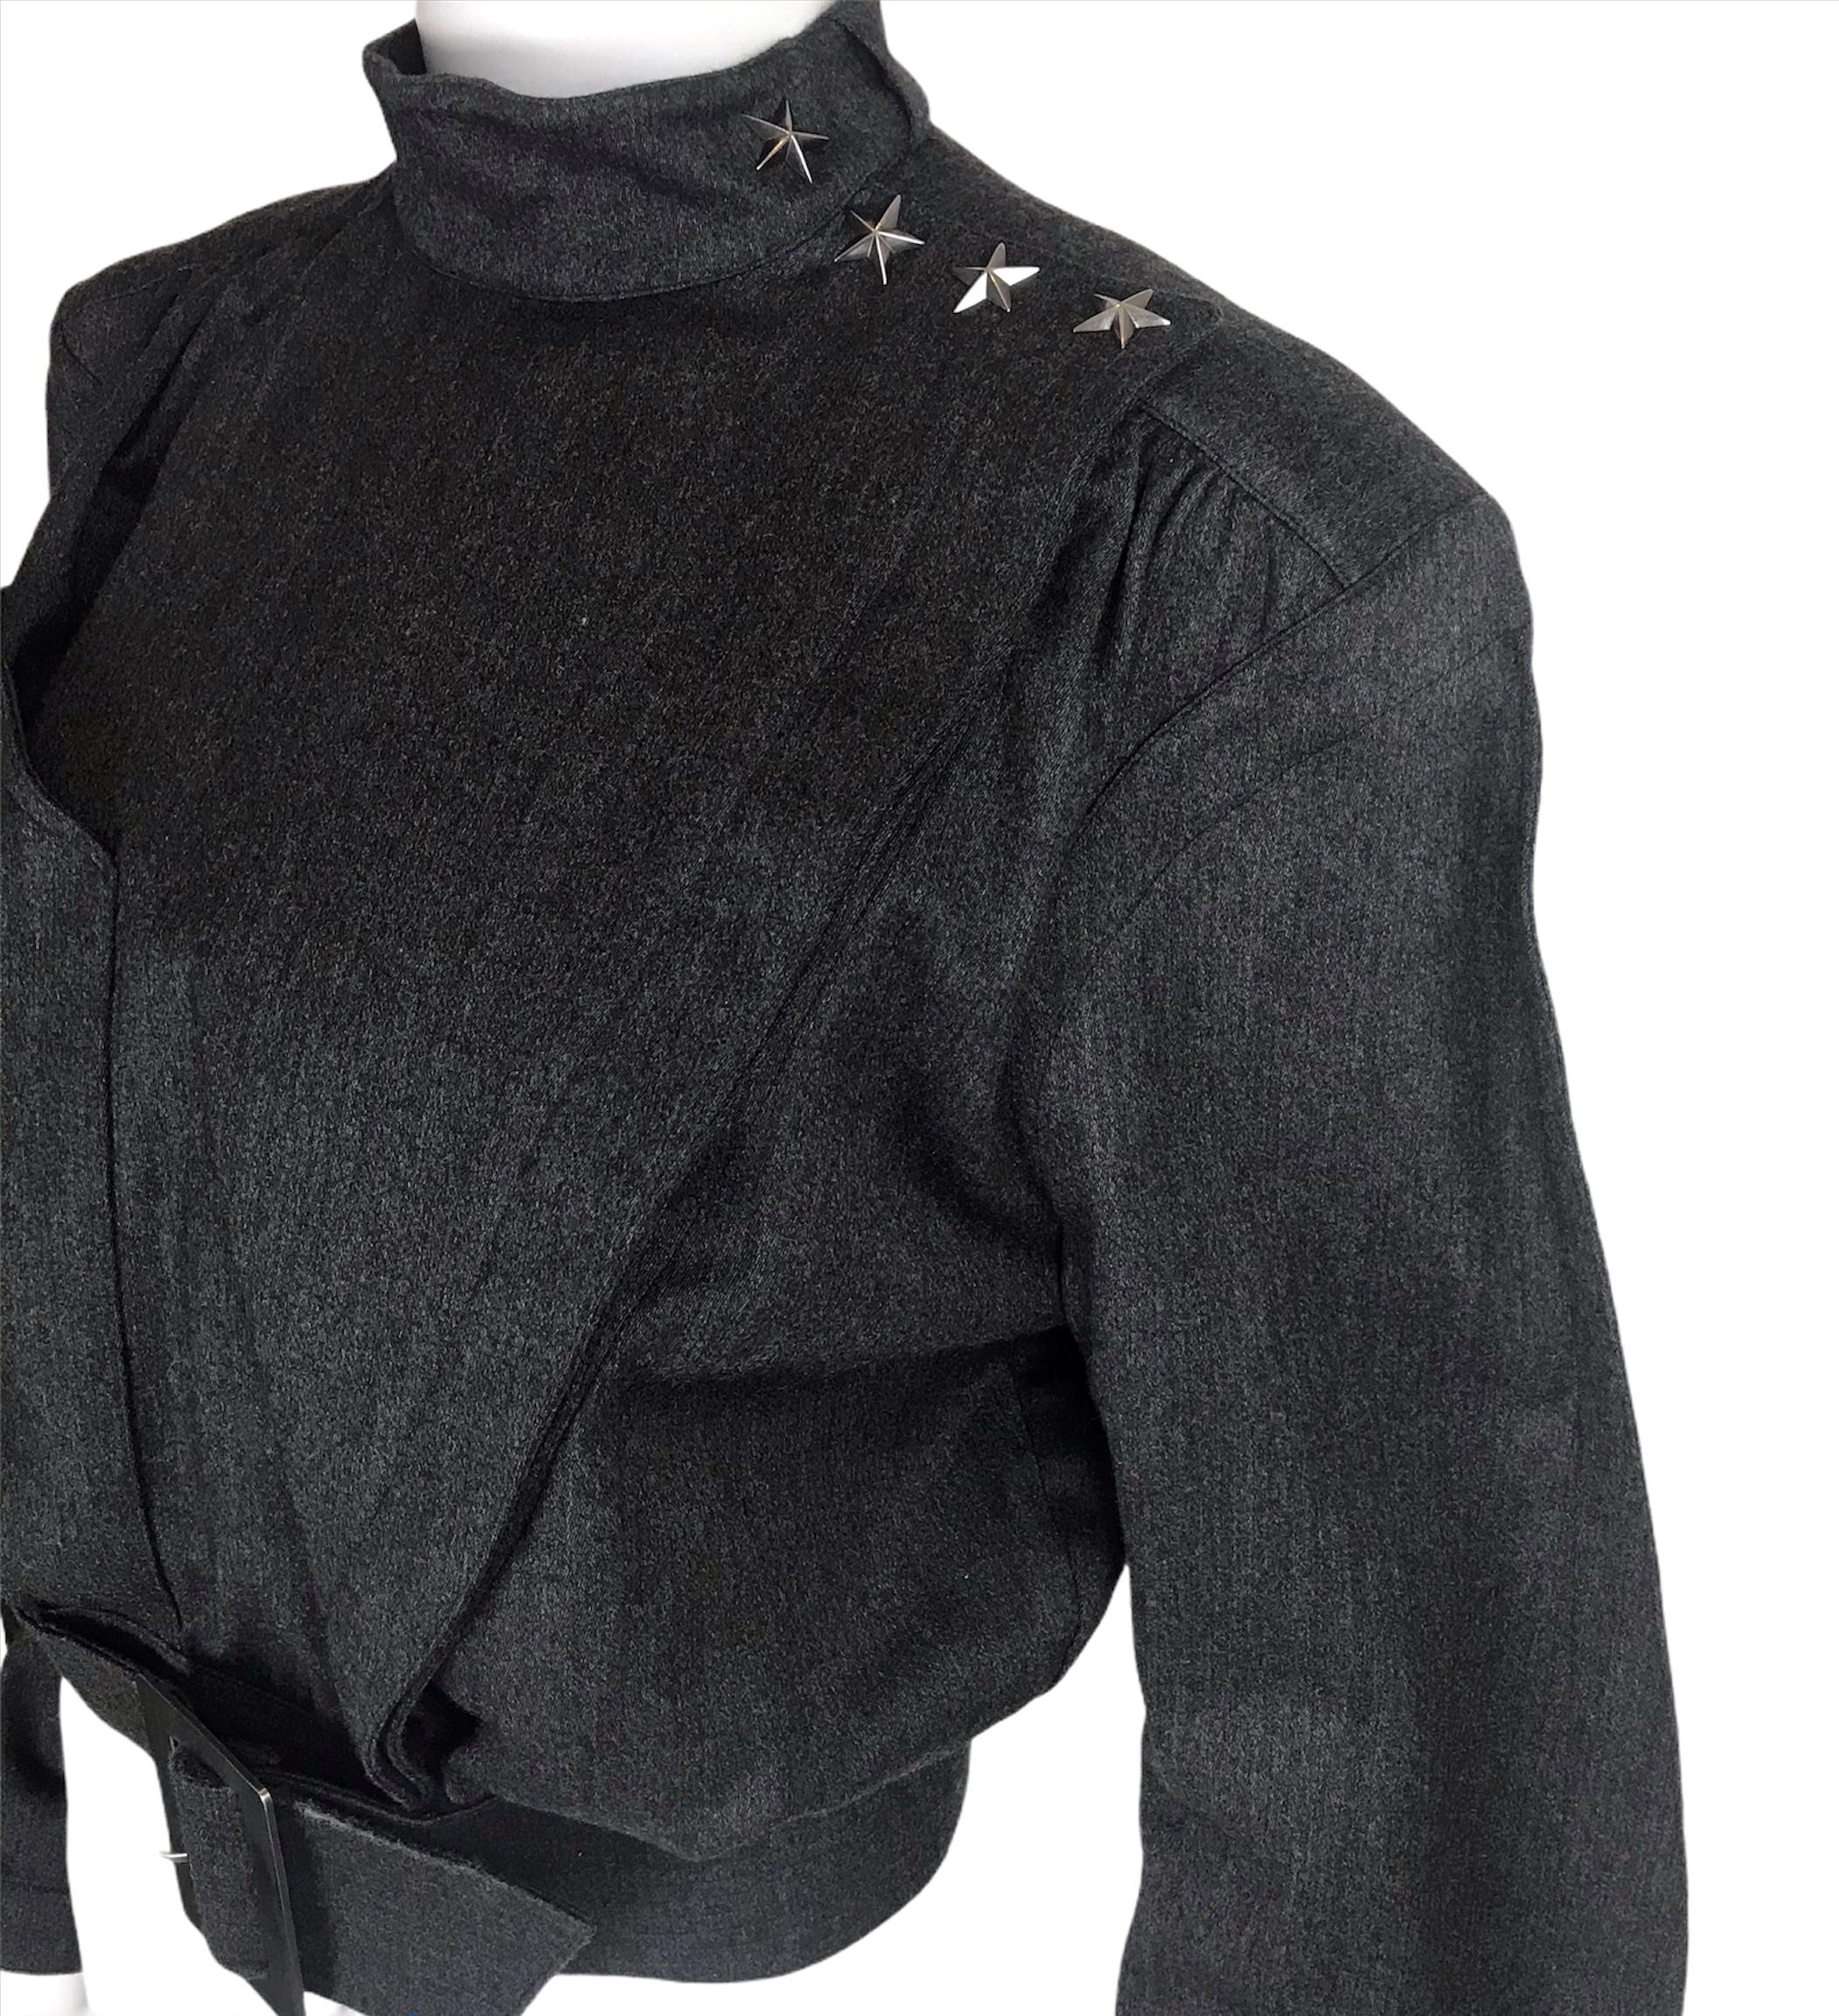 Black FW86 Thierry Mugler Space Age / Soviet Union Jacket Bold Shoulders Belted Waist